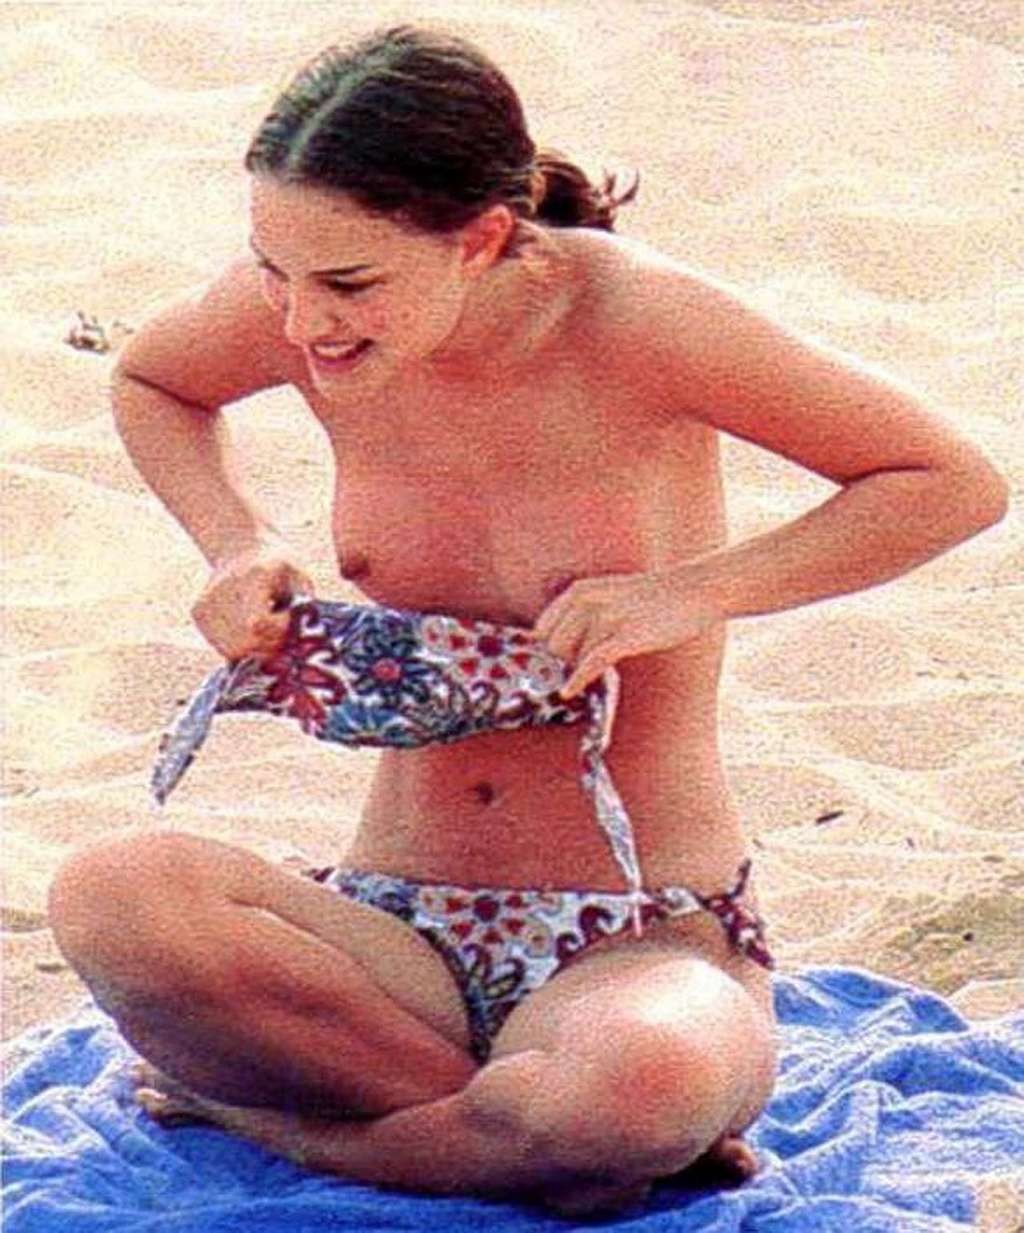 Natalie Portman exposing her nice ass in thong and tits slip paparazzi shoots #75336198